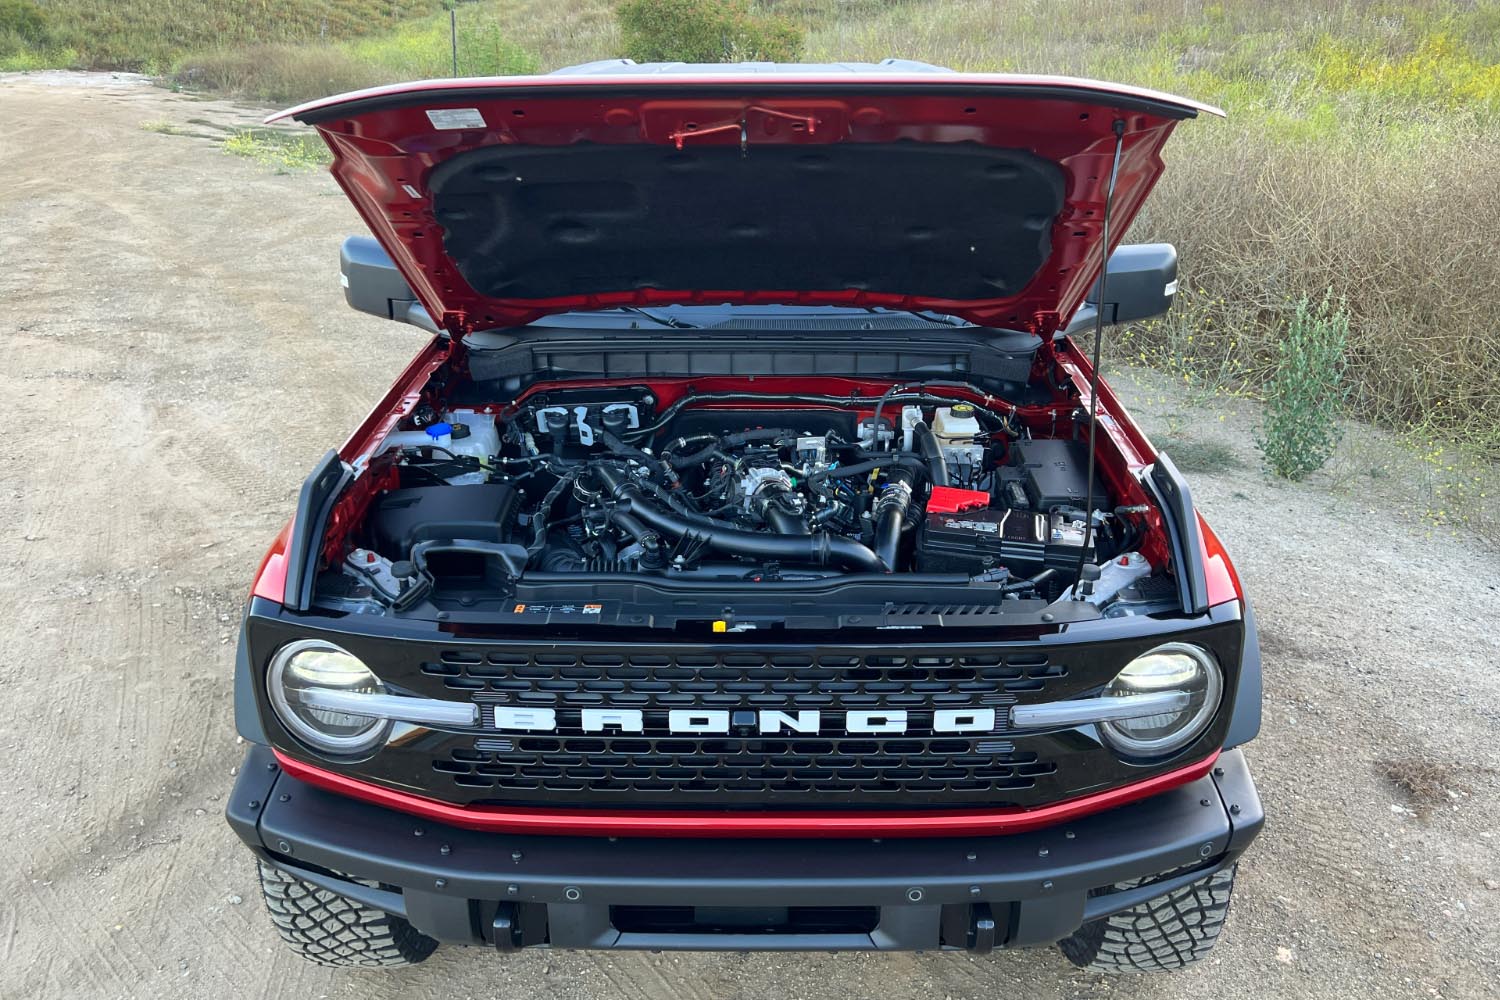 Engine underhood view of 2023 Ford Bronco in red